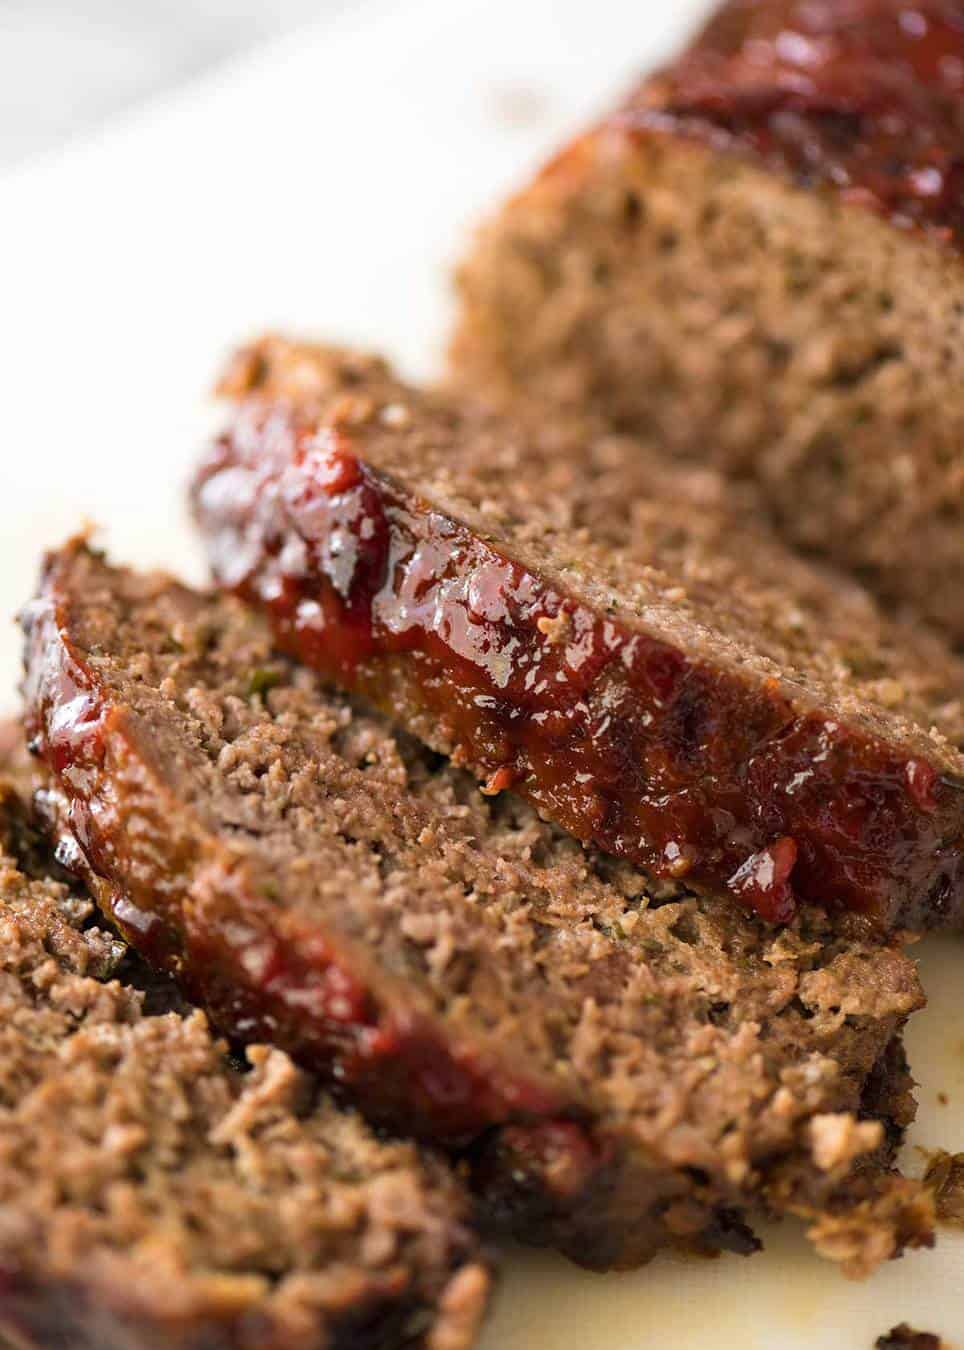 Meatloaf is so much more than a giant hunk of ground beef in a loaf shape. It should ooze with flavour, be moist and tender yet not crumble apart when sliced. www.recipetineats.com